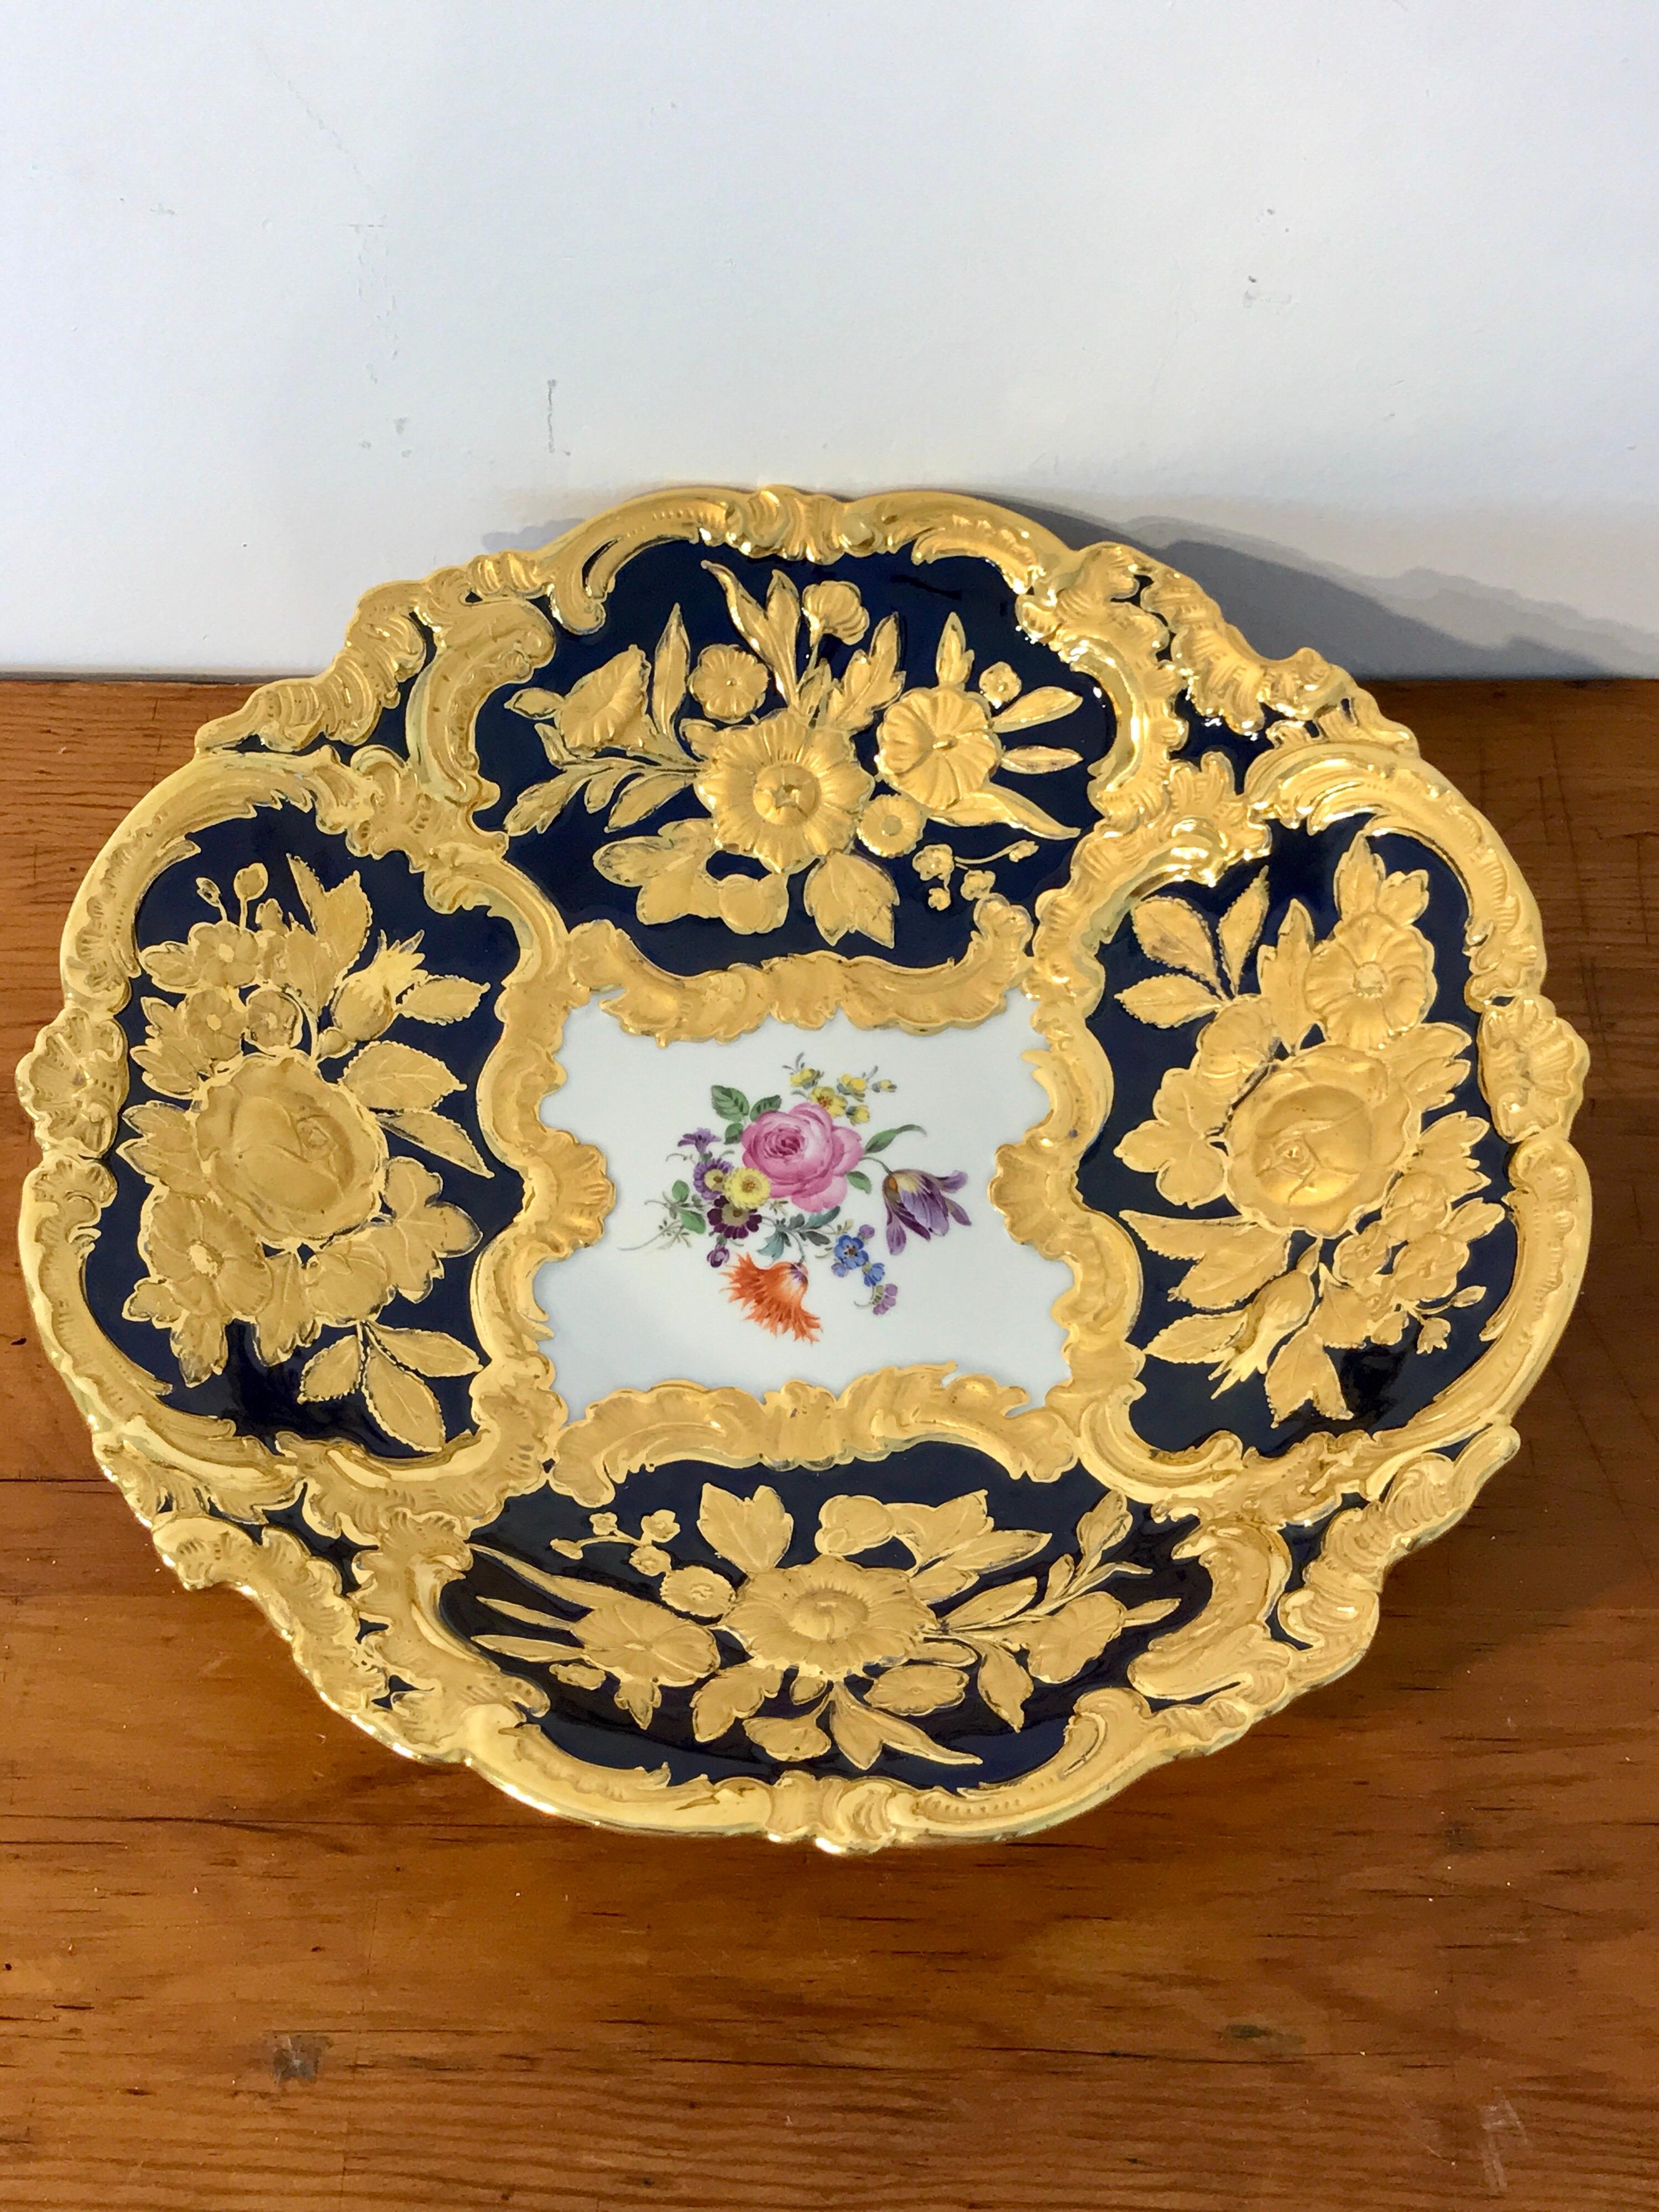 Meissen cobalt and gold encrusted floral centre bowl, of the best quality, finely painted marked blue crossswords, painters and gilders numbers. Presently this item is at our West Palm Beach location.